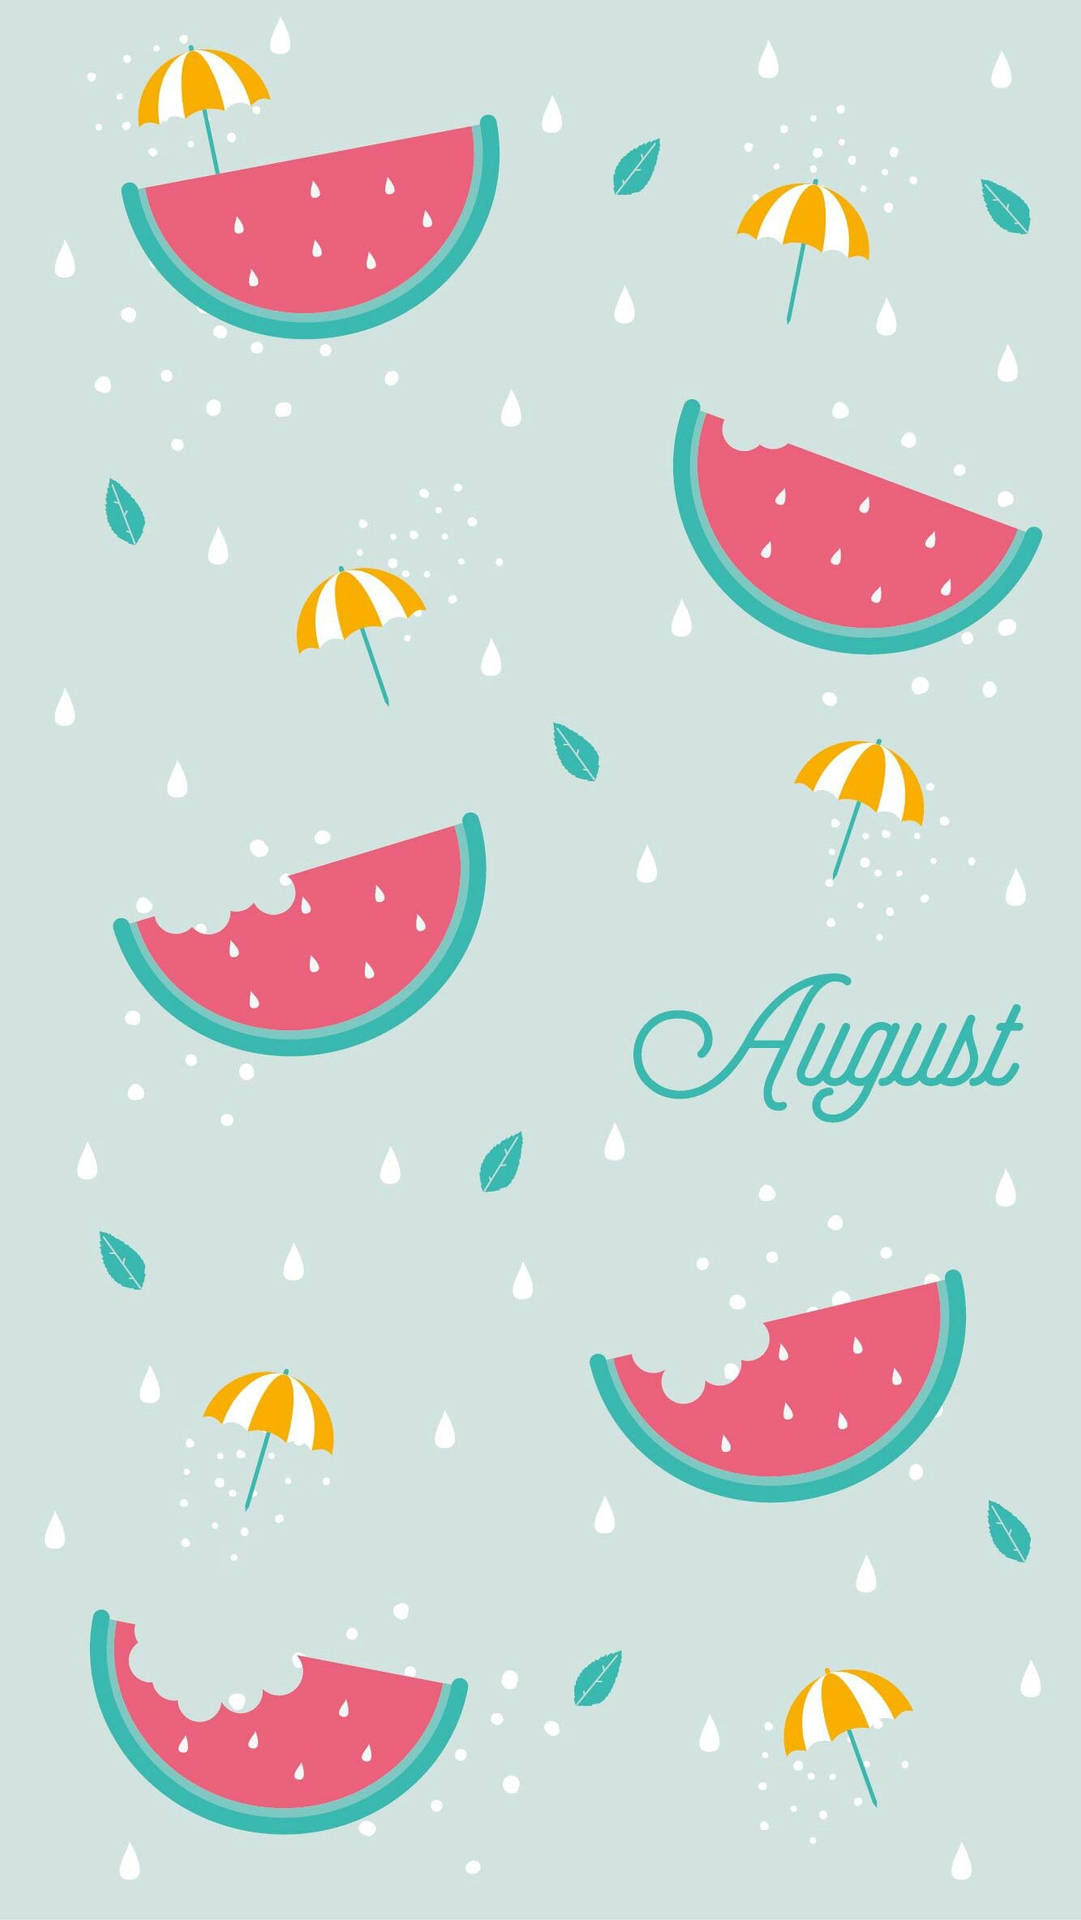 Reap The Rewards Of August With A Refreshing Watermelon Snack